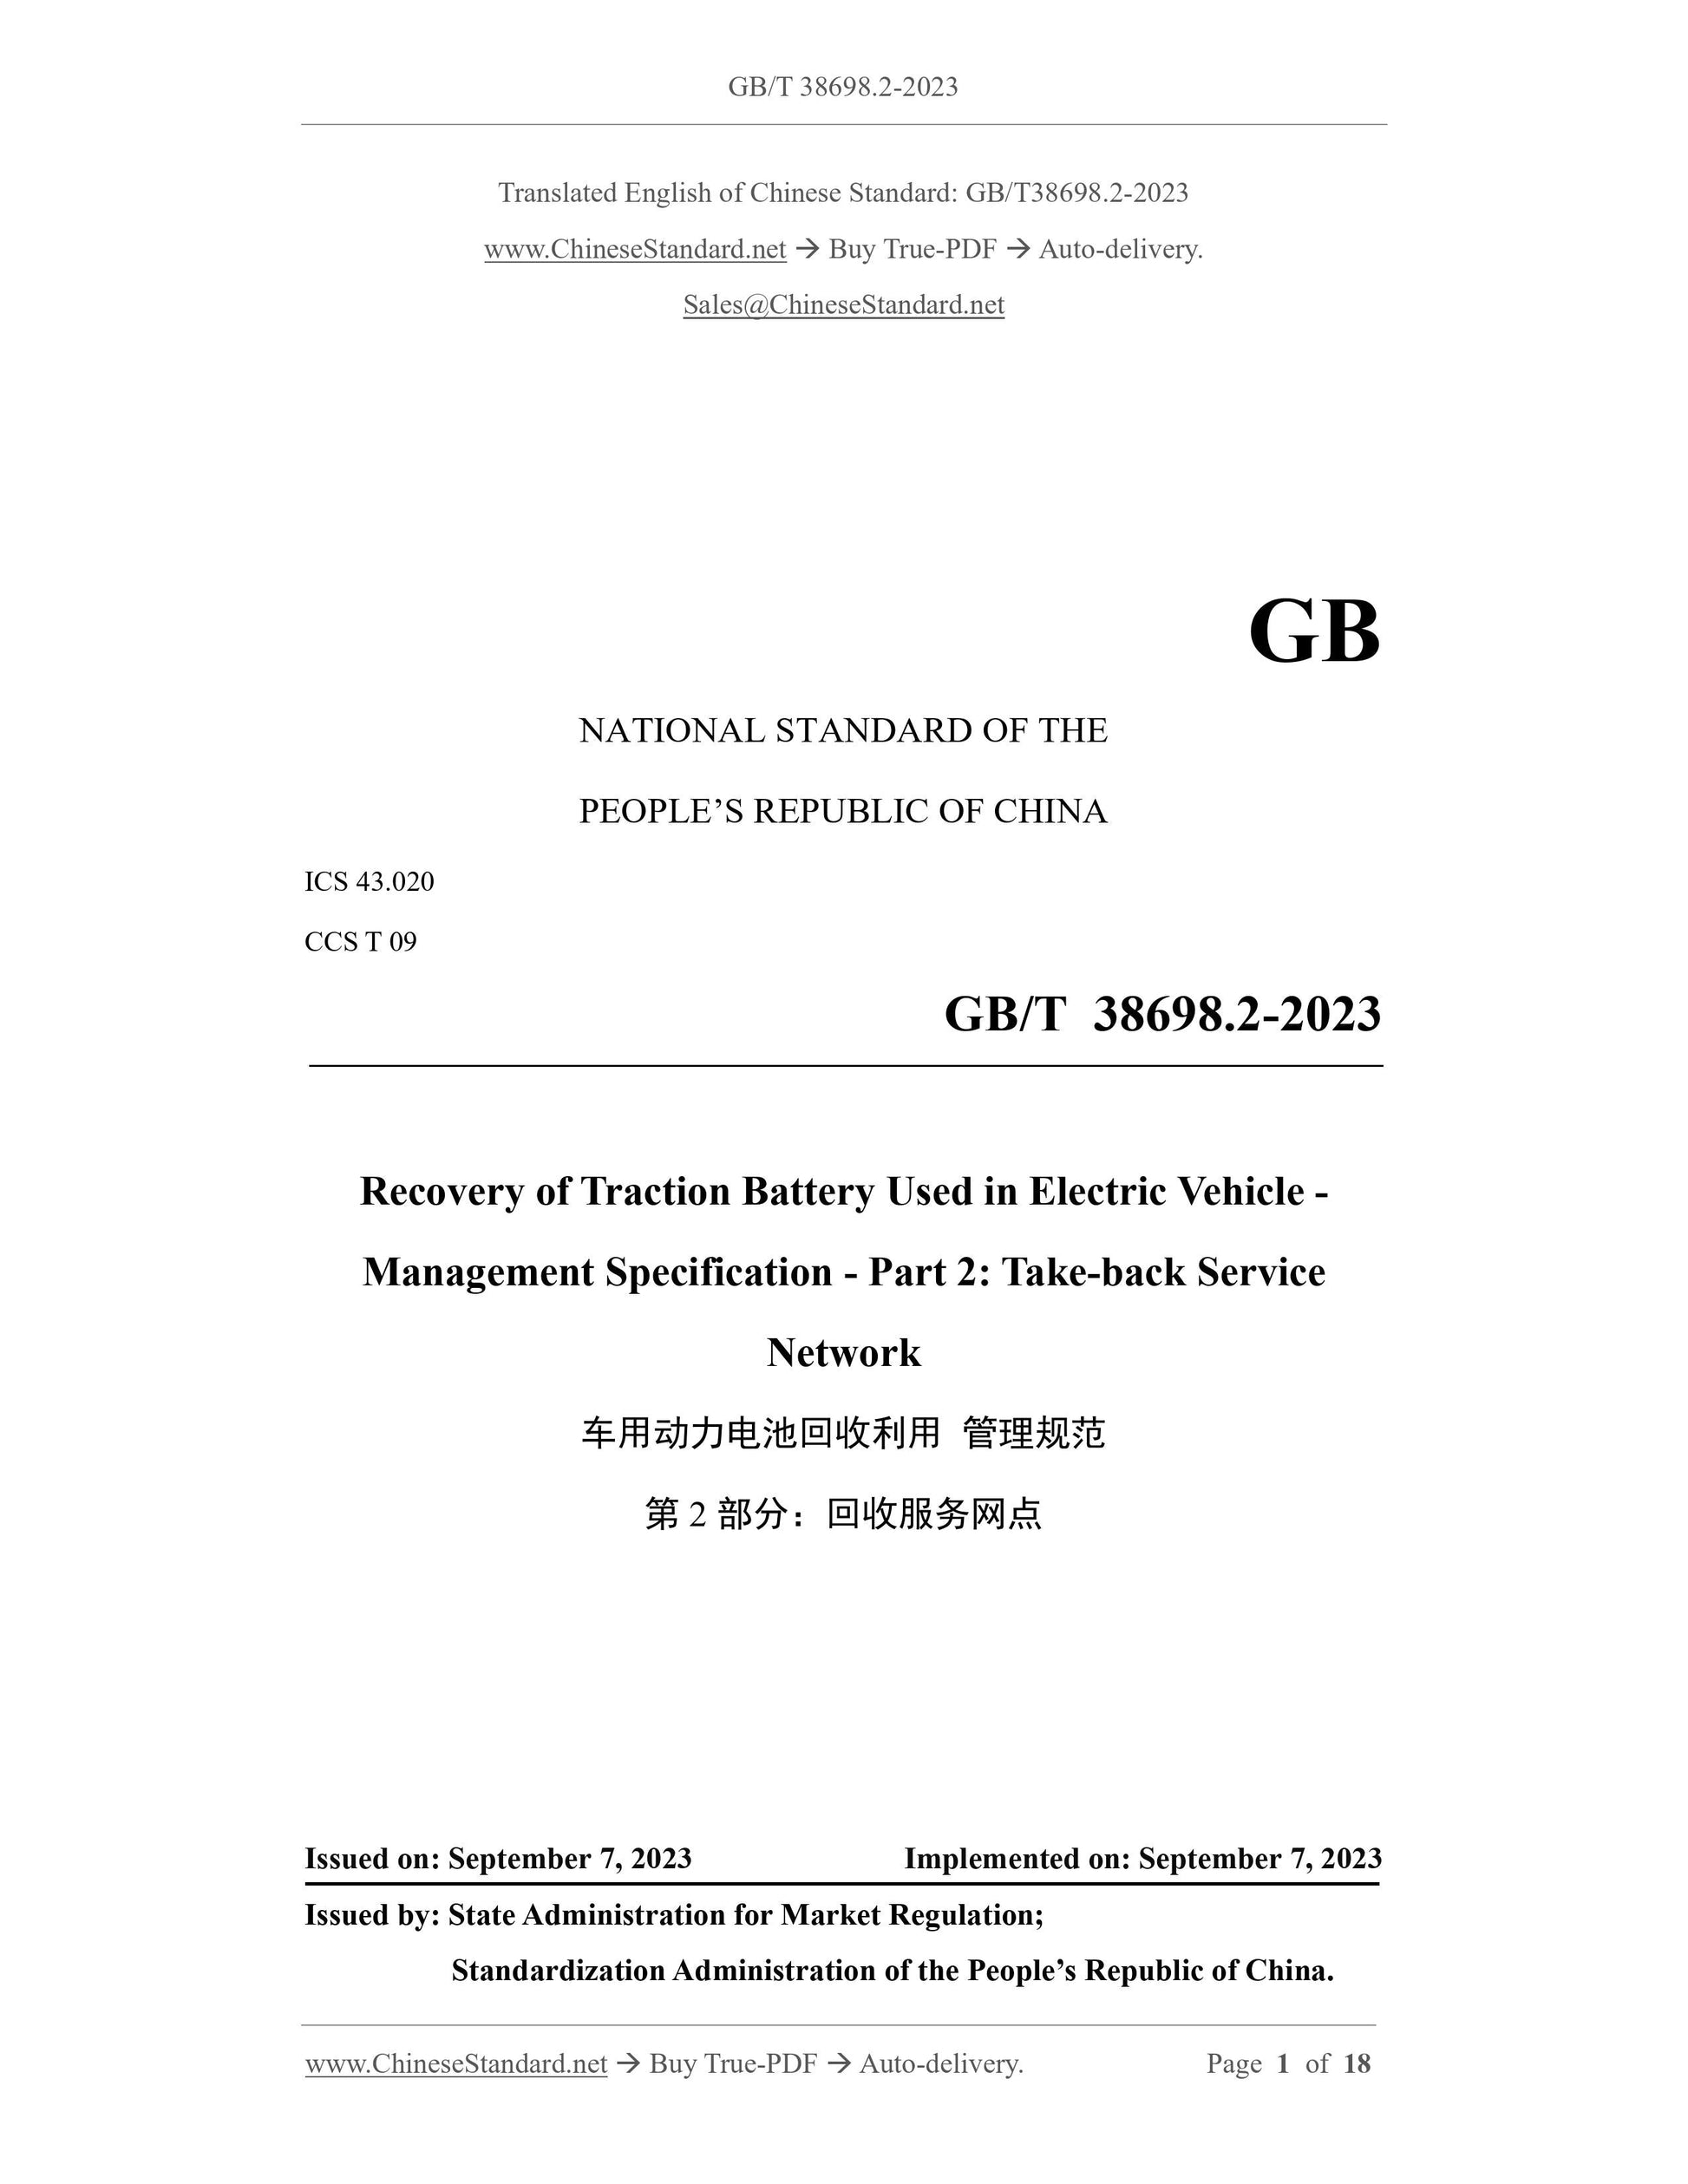 GB/T 38698.2-2023 Page 1